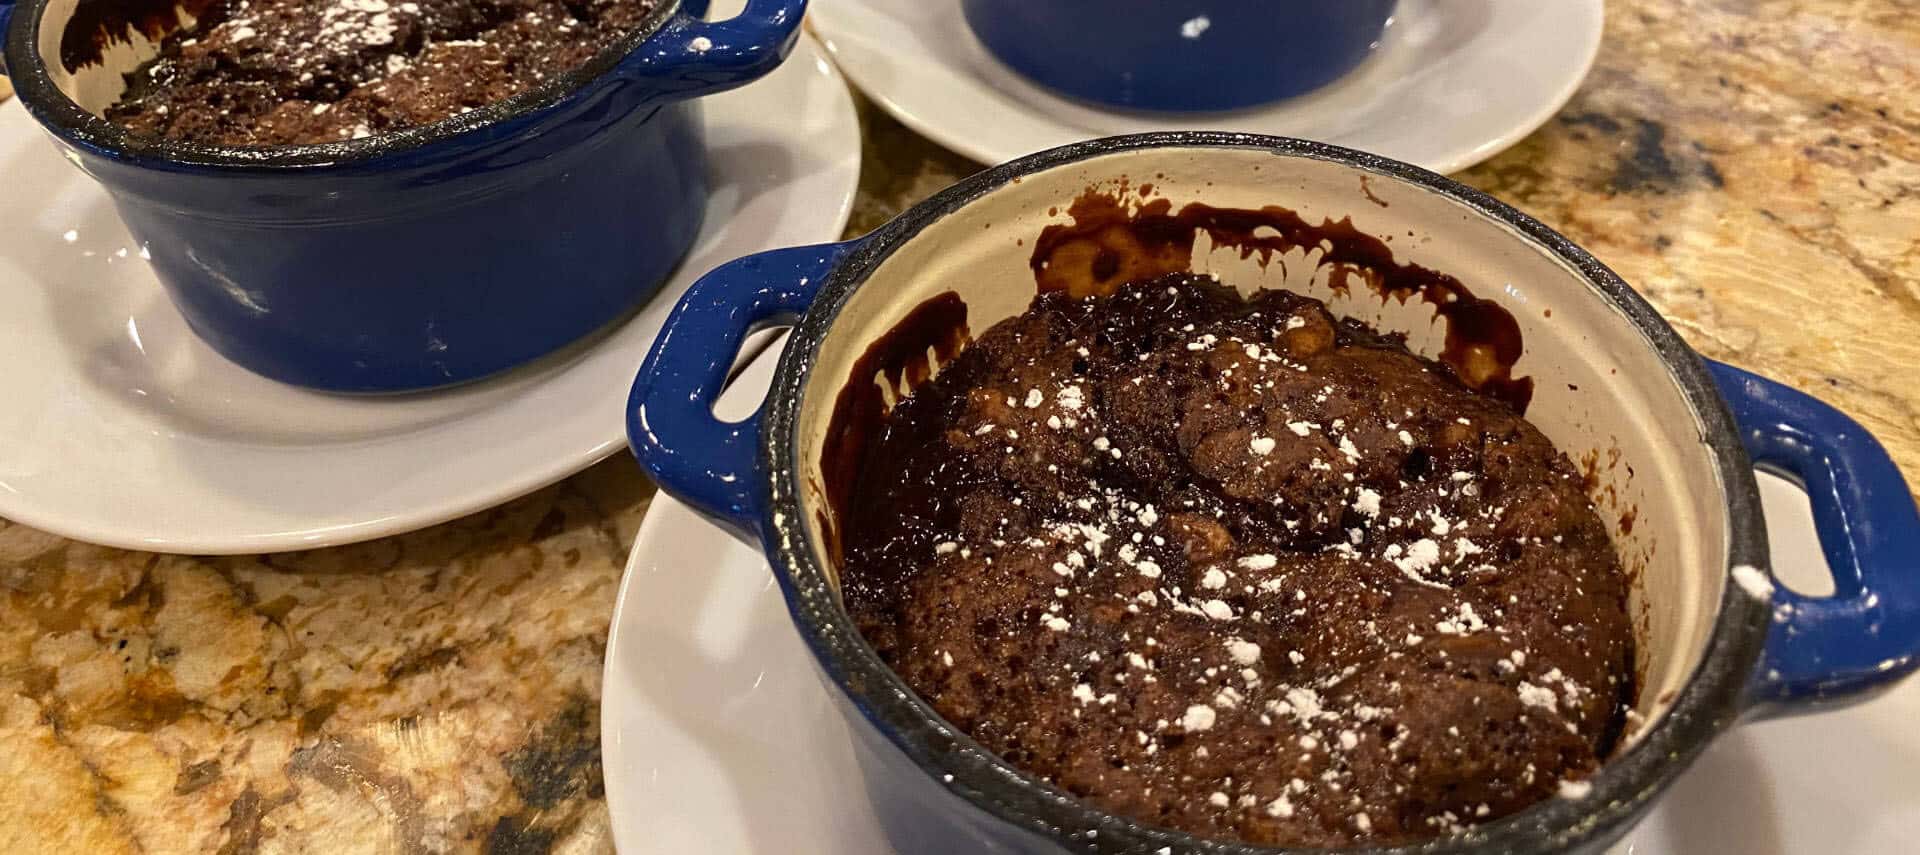 Rich chocolate pudding cakes